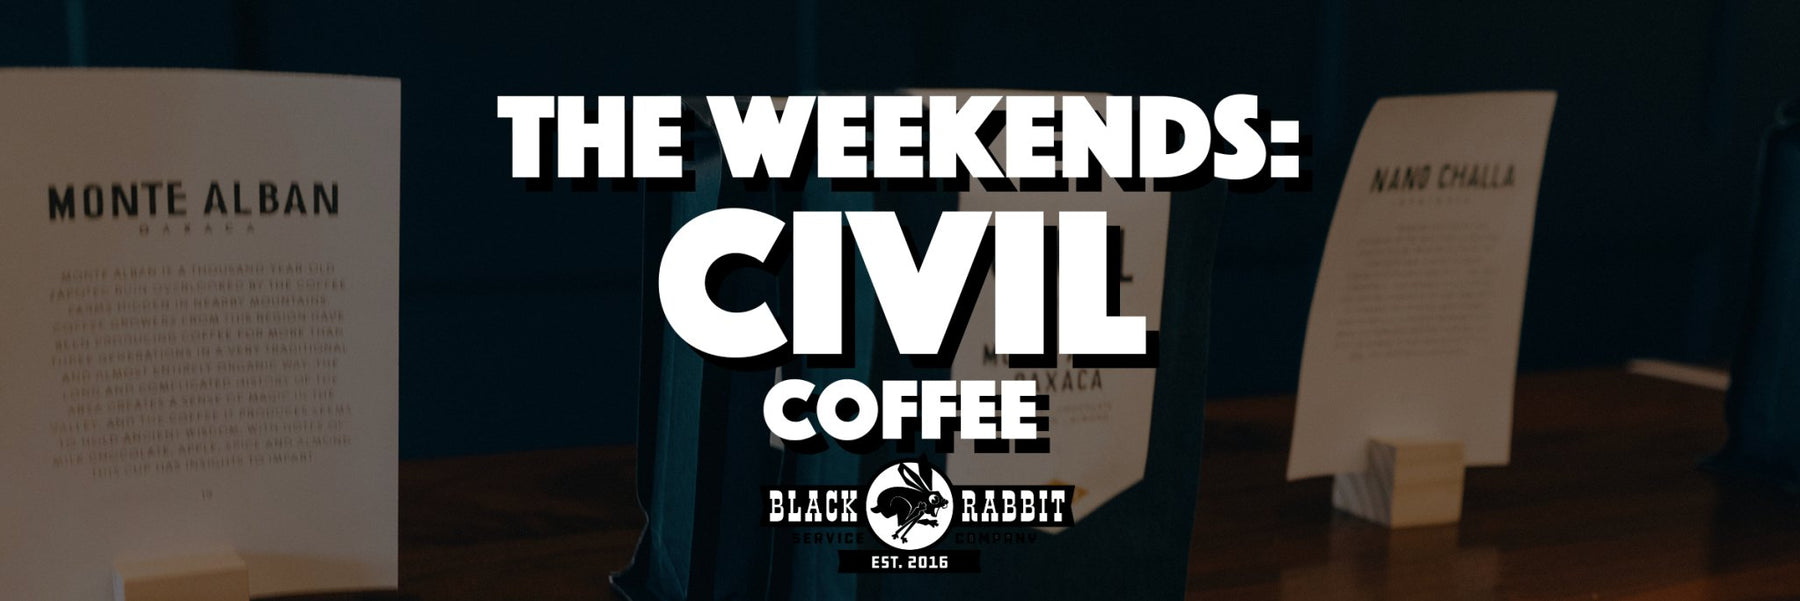 The Weekends: Civil Coffee | The Rabbit Hole - Black Rabbit Service Co.